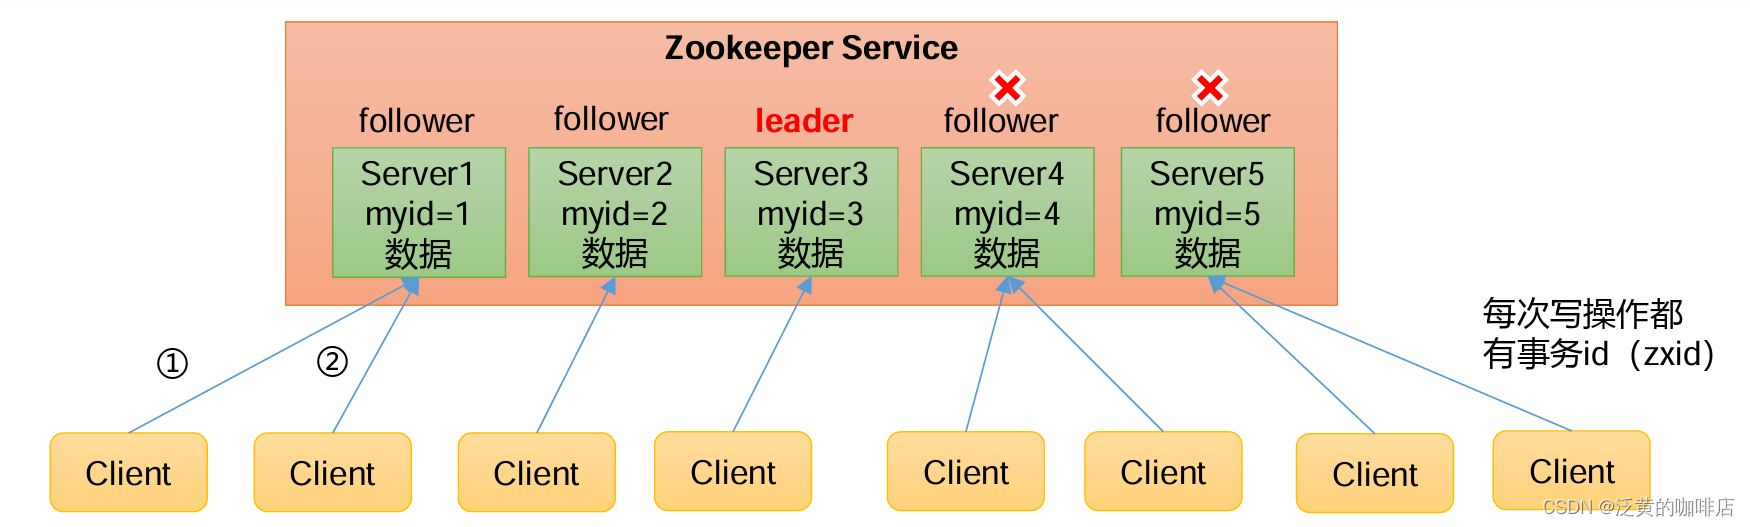 <span style='color:red;'>大</span><span style='color:red;'>数据</span><span style='color:red;'>Zookeeper</span>--入门